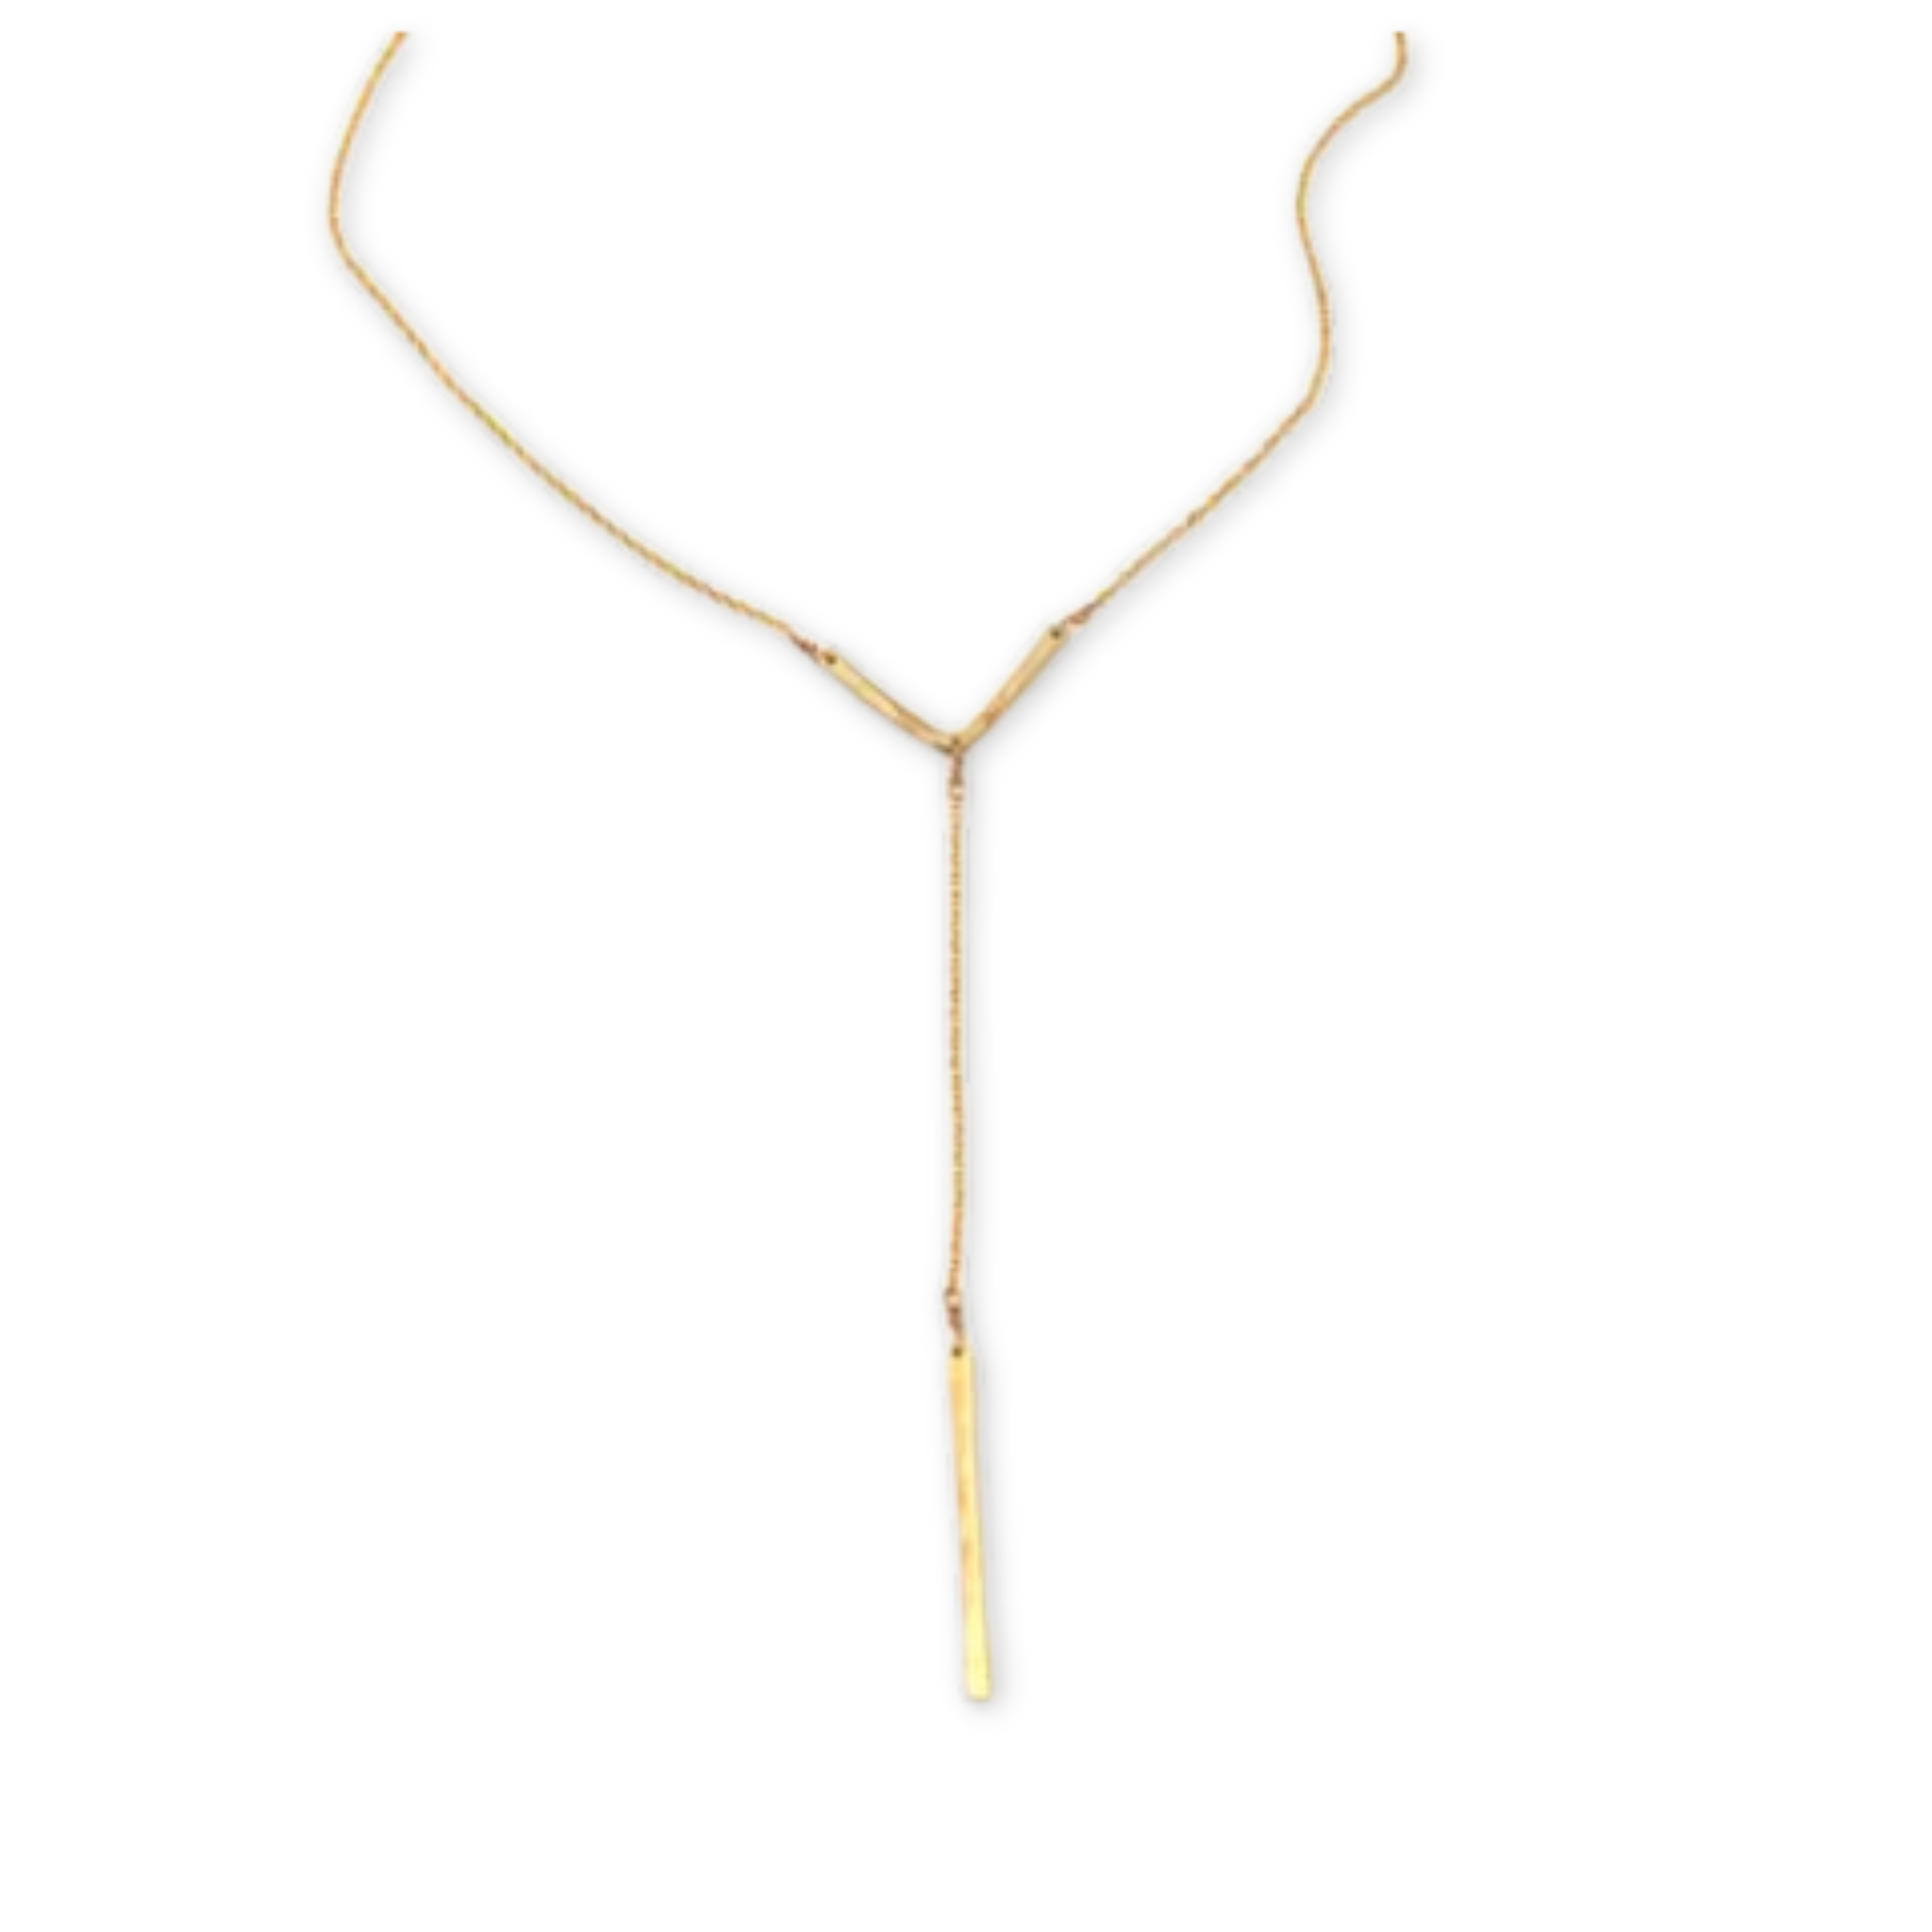 necklace with a dangling chain and a thin hanging bar